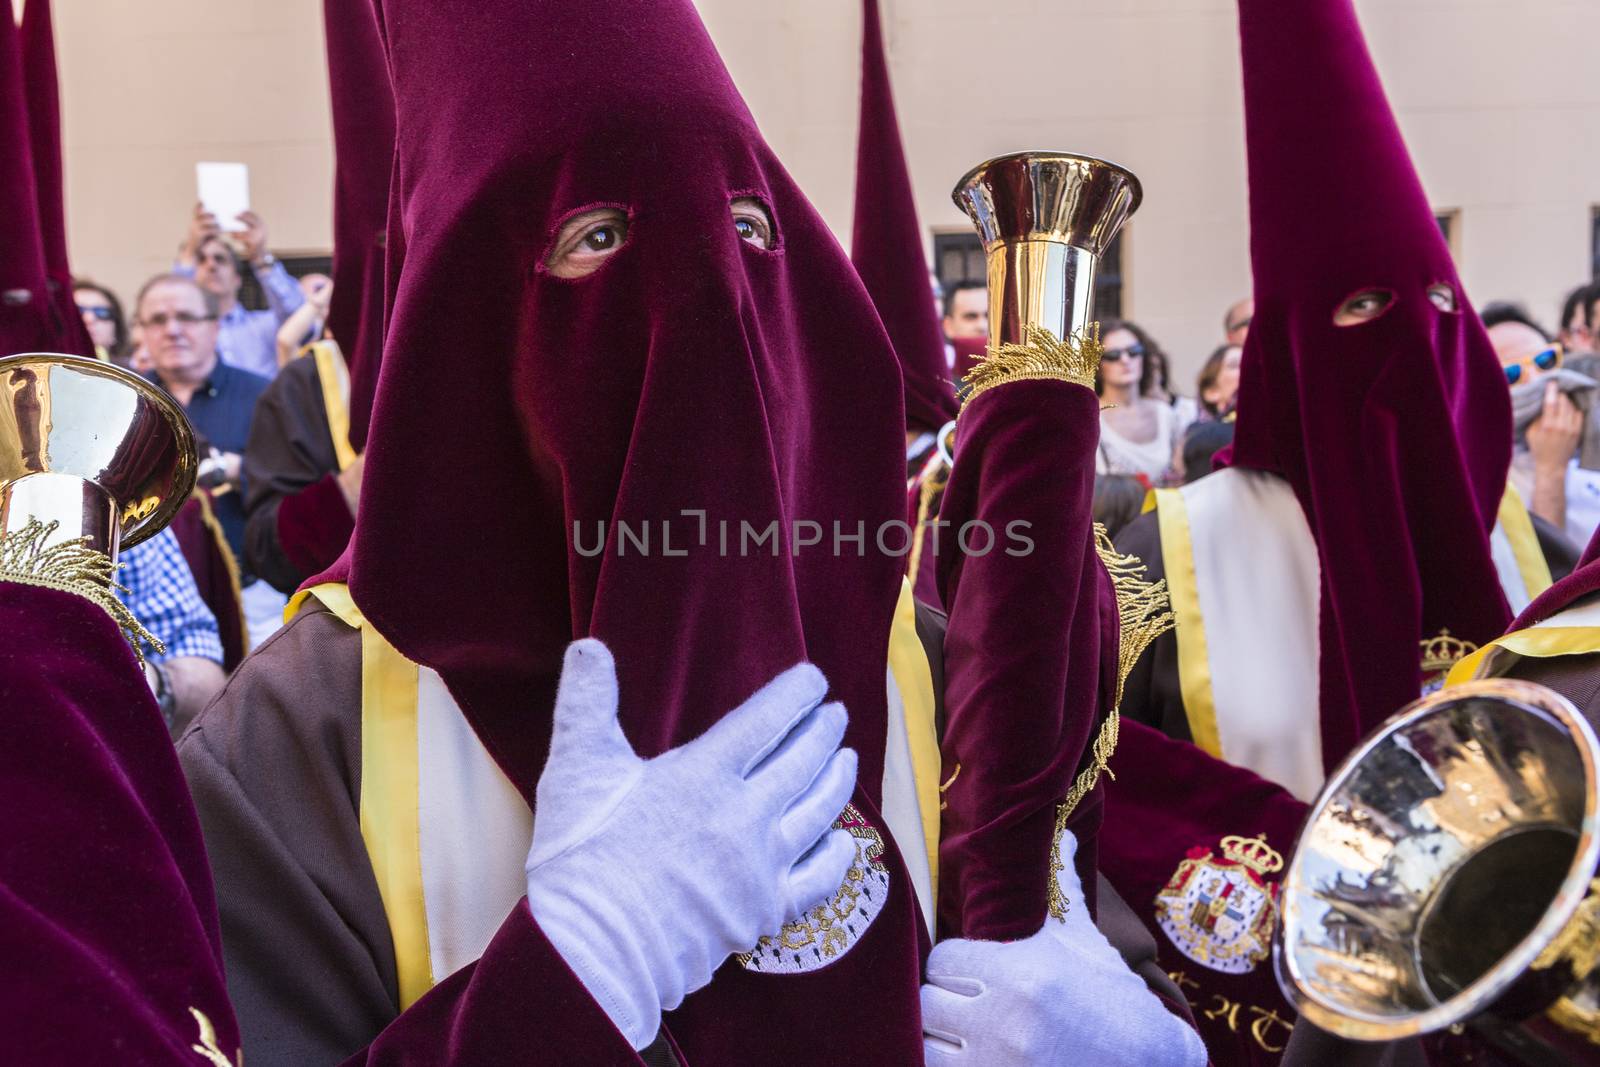 Linares, Jaen province, SPAIN - March 17, 2014: Nazarenes with red tunics and trumpets in the hands of penance during station, taken in Linares, Jaen province, Andalusia, Spain